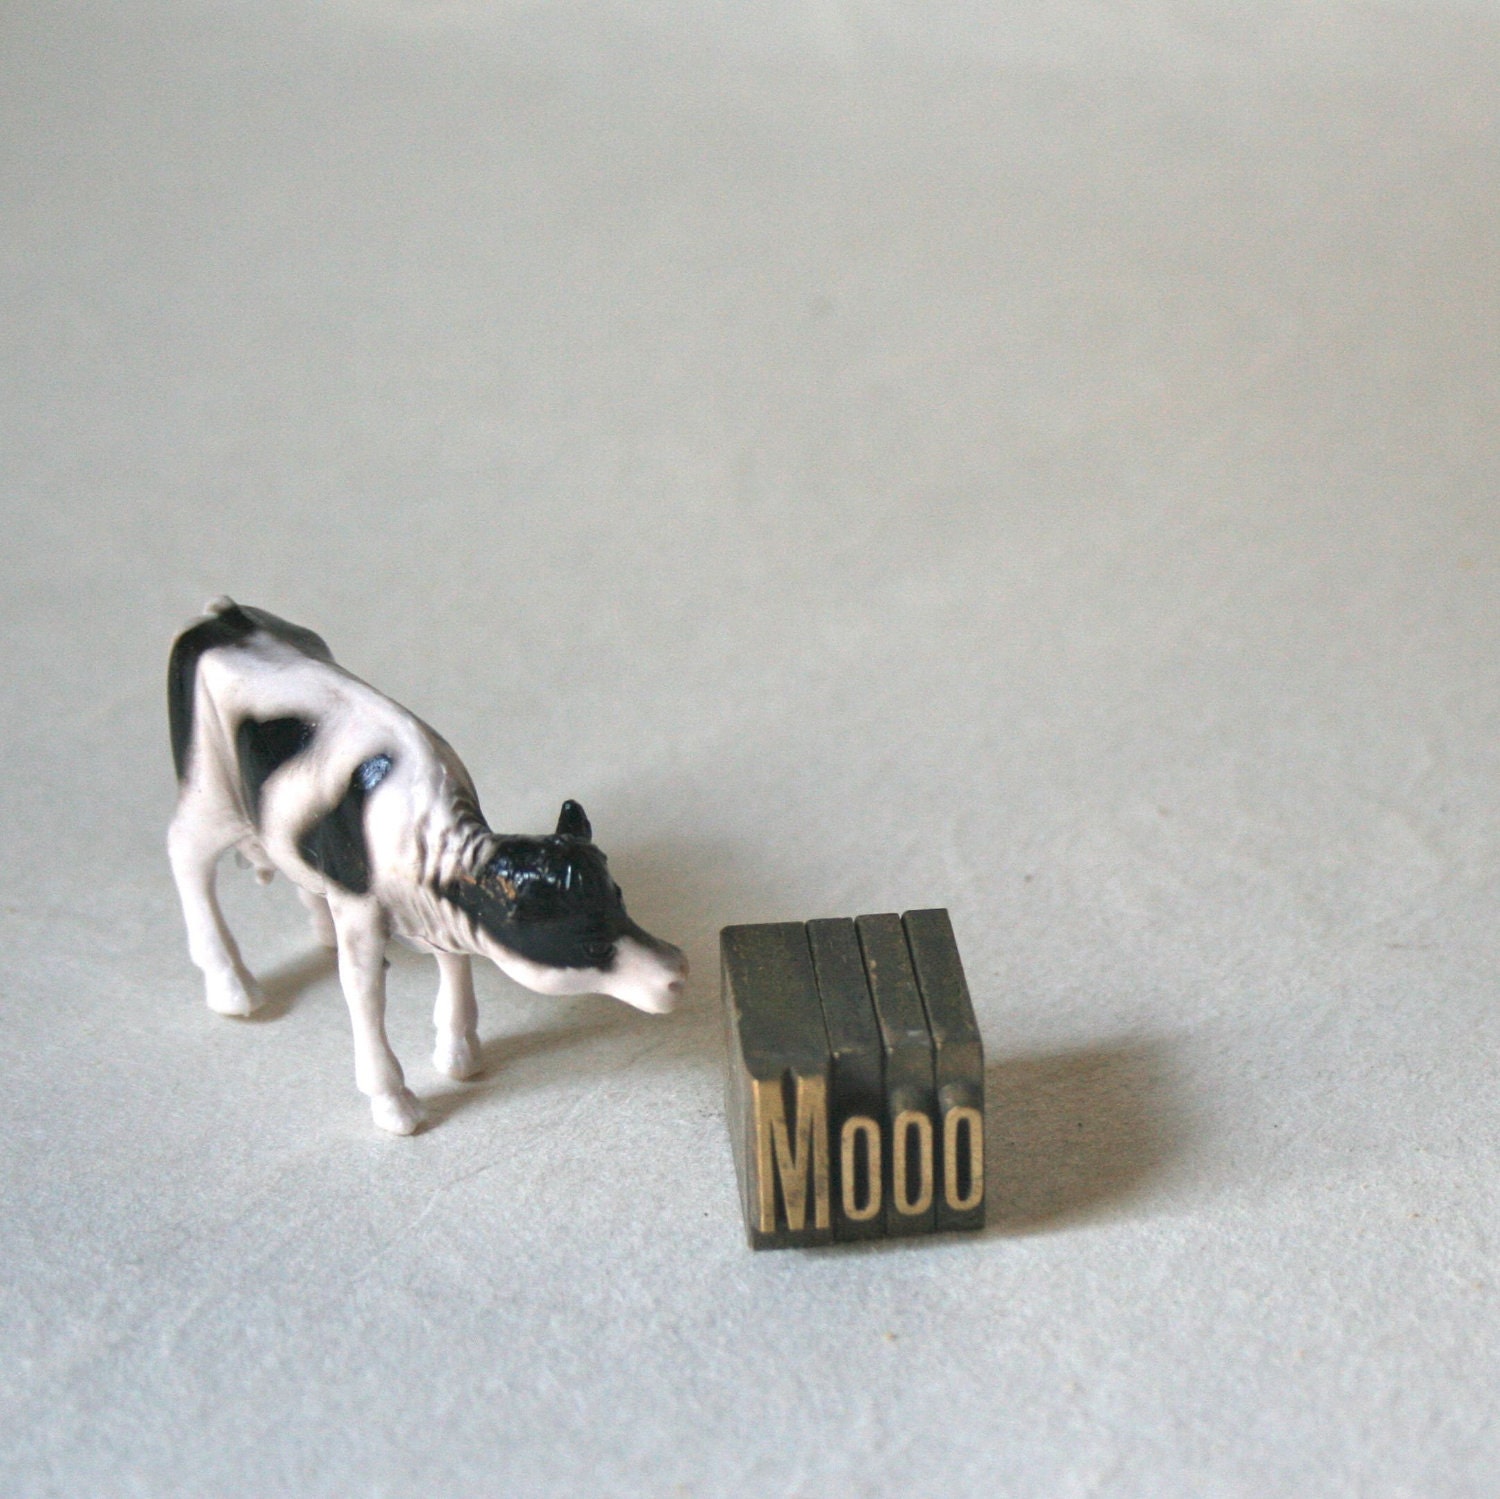 Mooo - Vintage Brass Letterpress Type with Cow